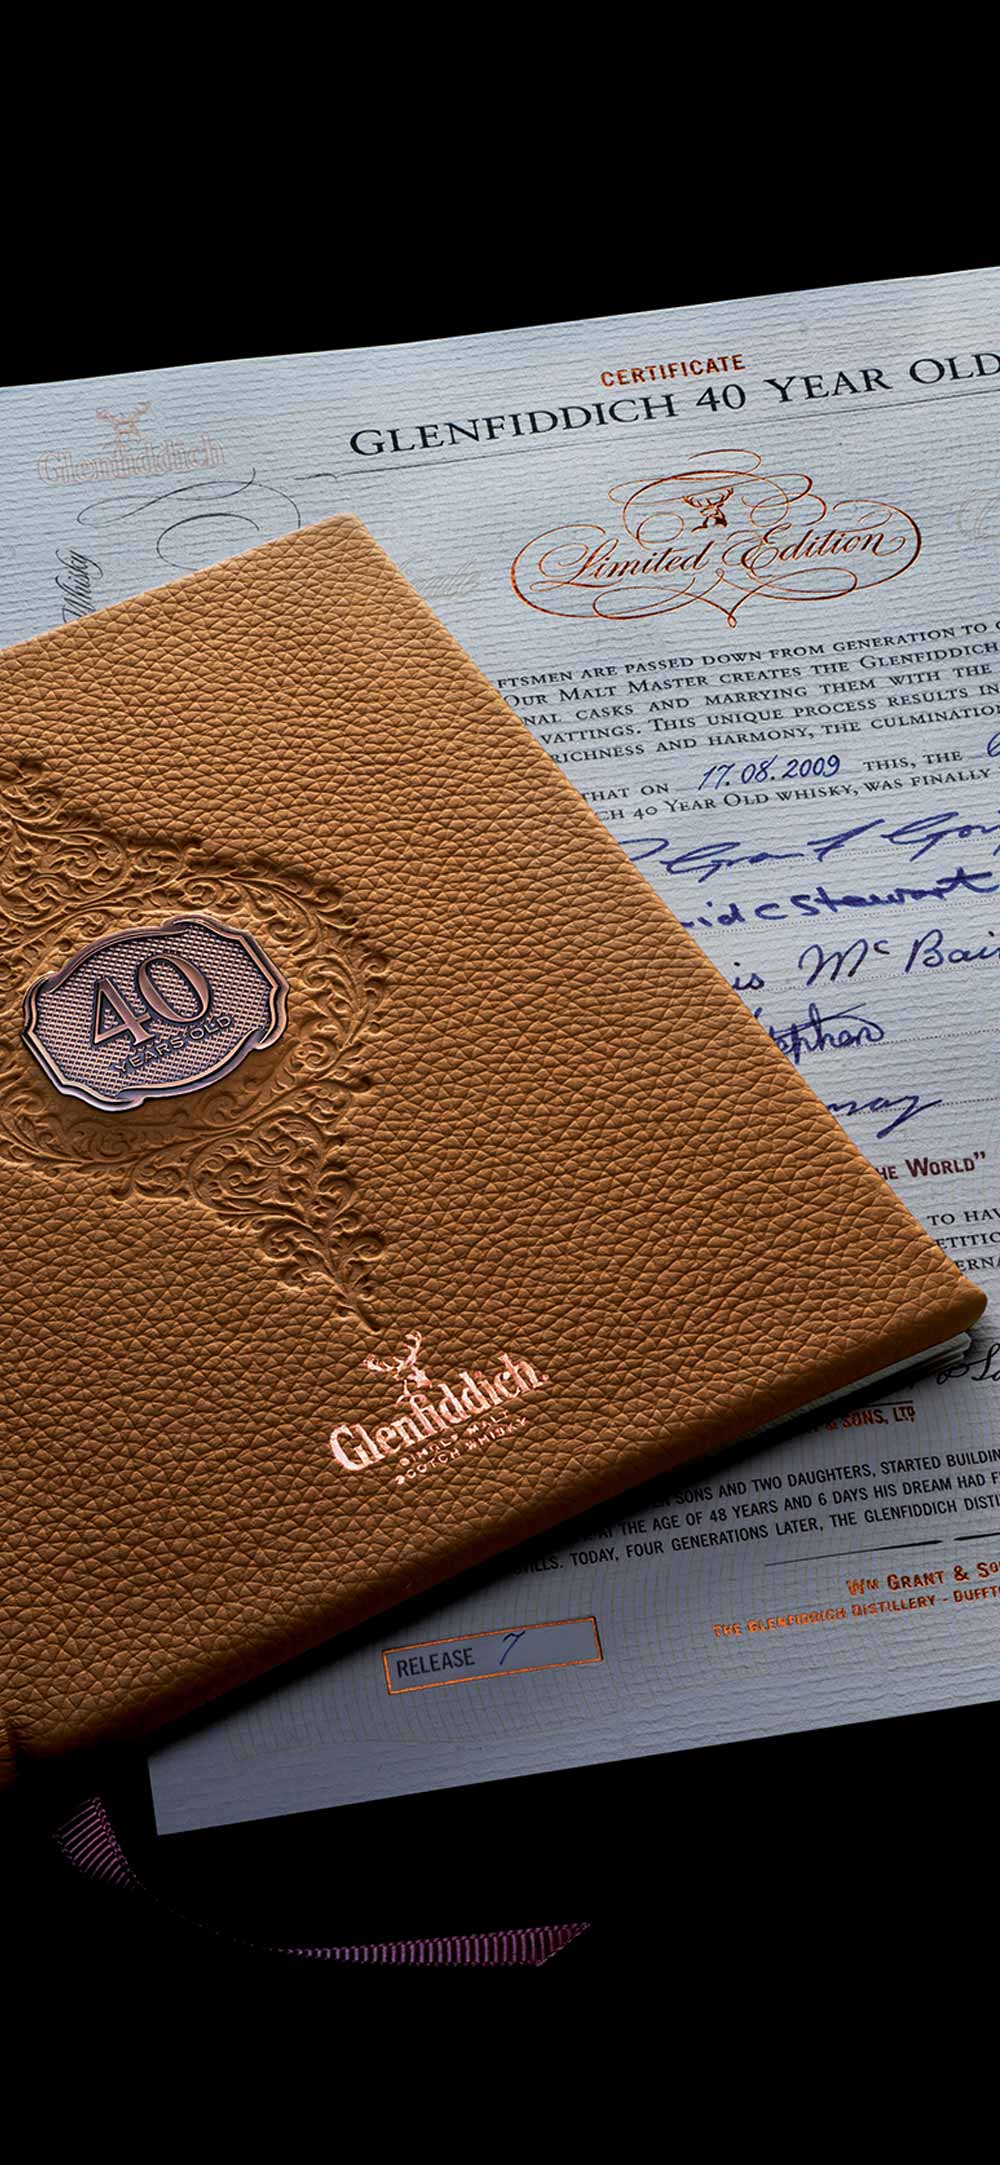 Glenfiddich 40 year old certificate and leather book